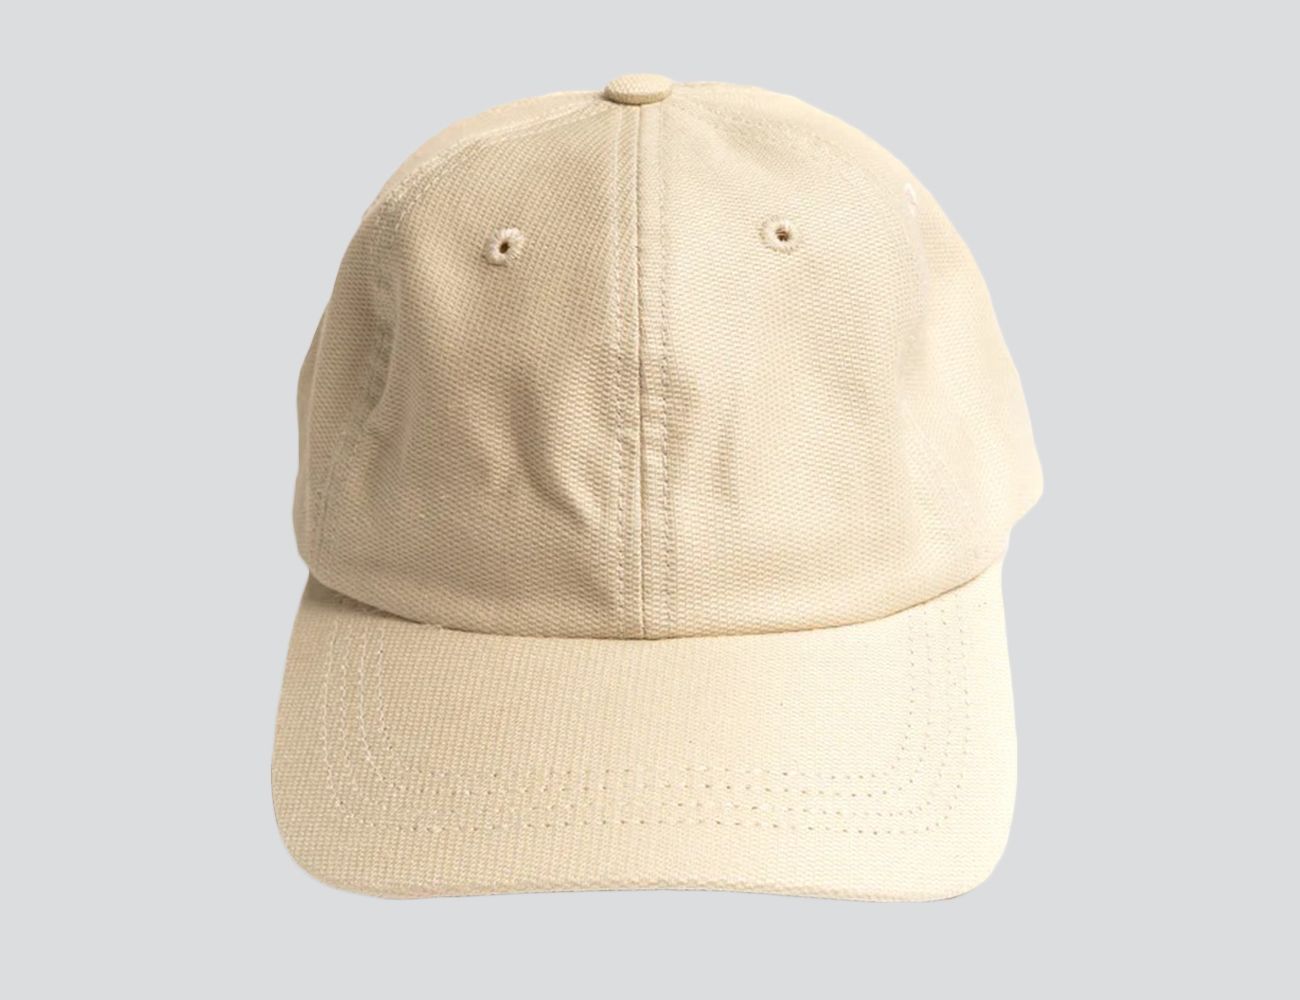 den første entusiasme Accord The 12 Coolest Baseball Caps for Keeping the Sun Out of Your Eyes